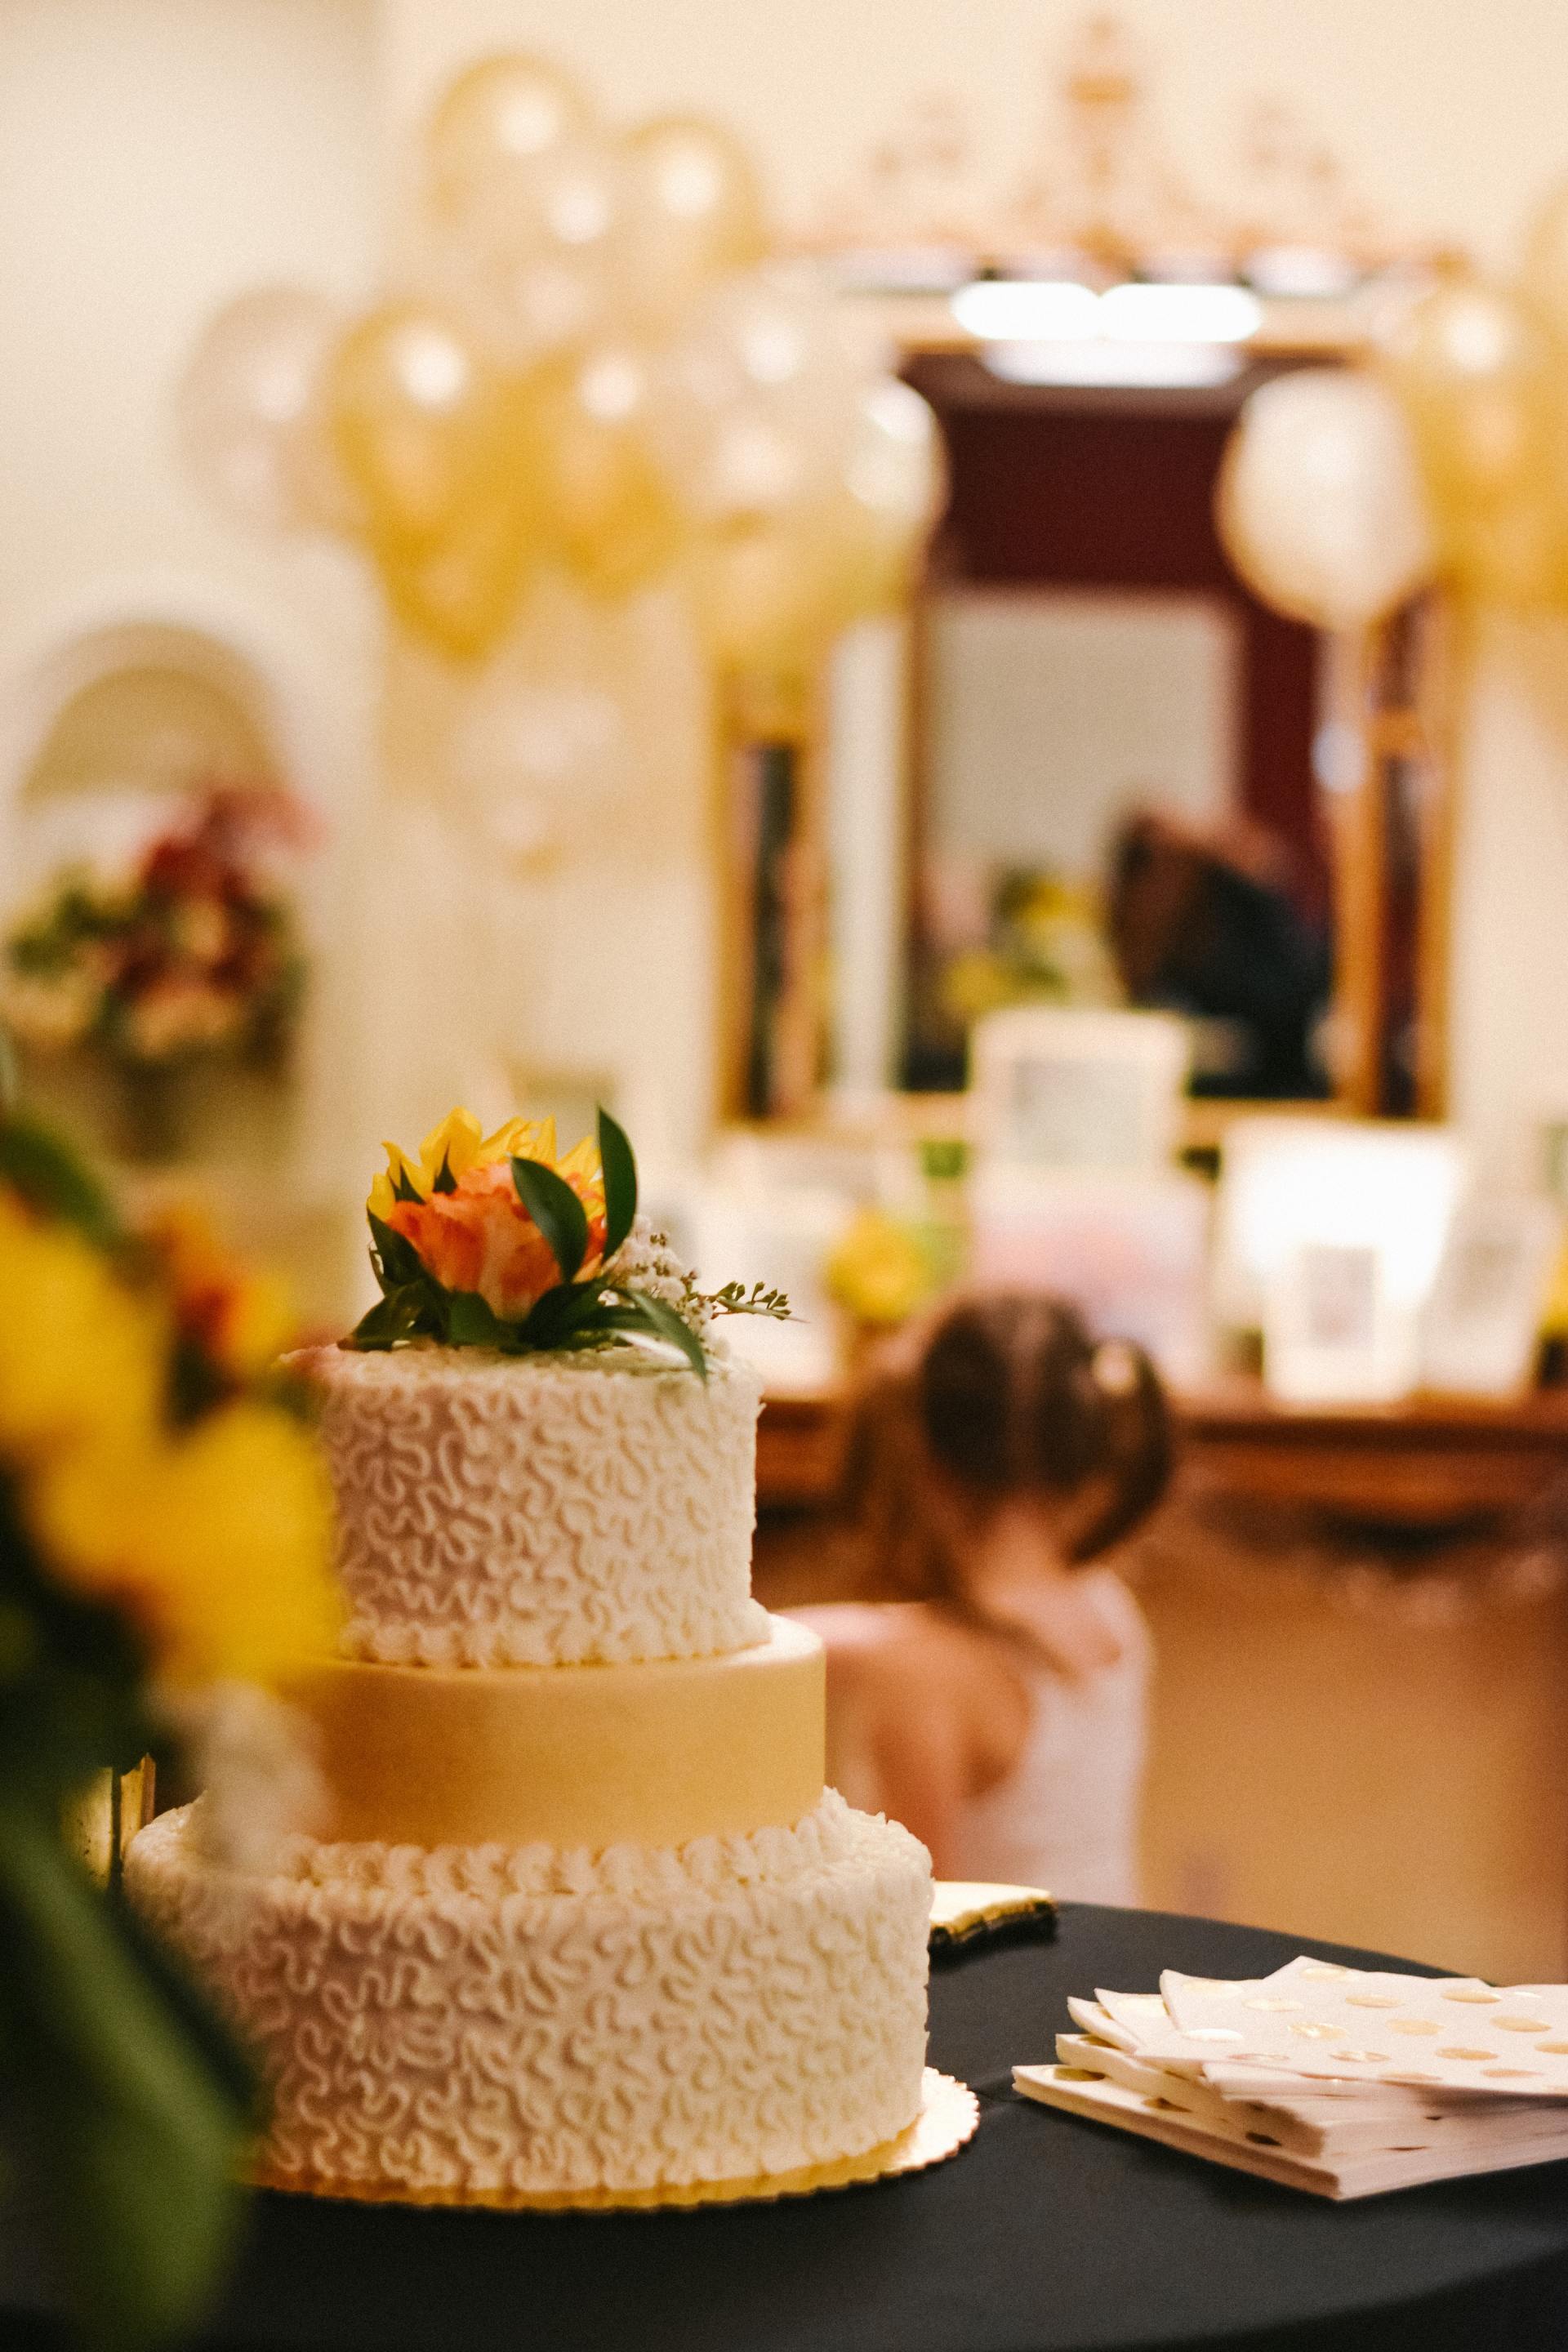 a three tiered cake with flowers on top sits on a table